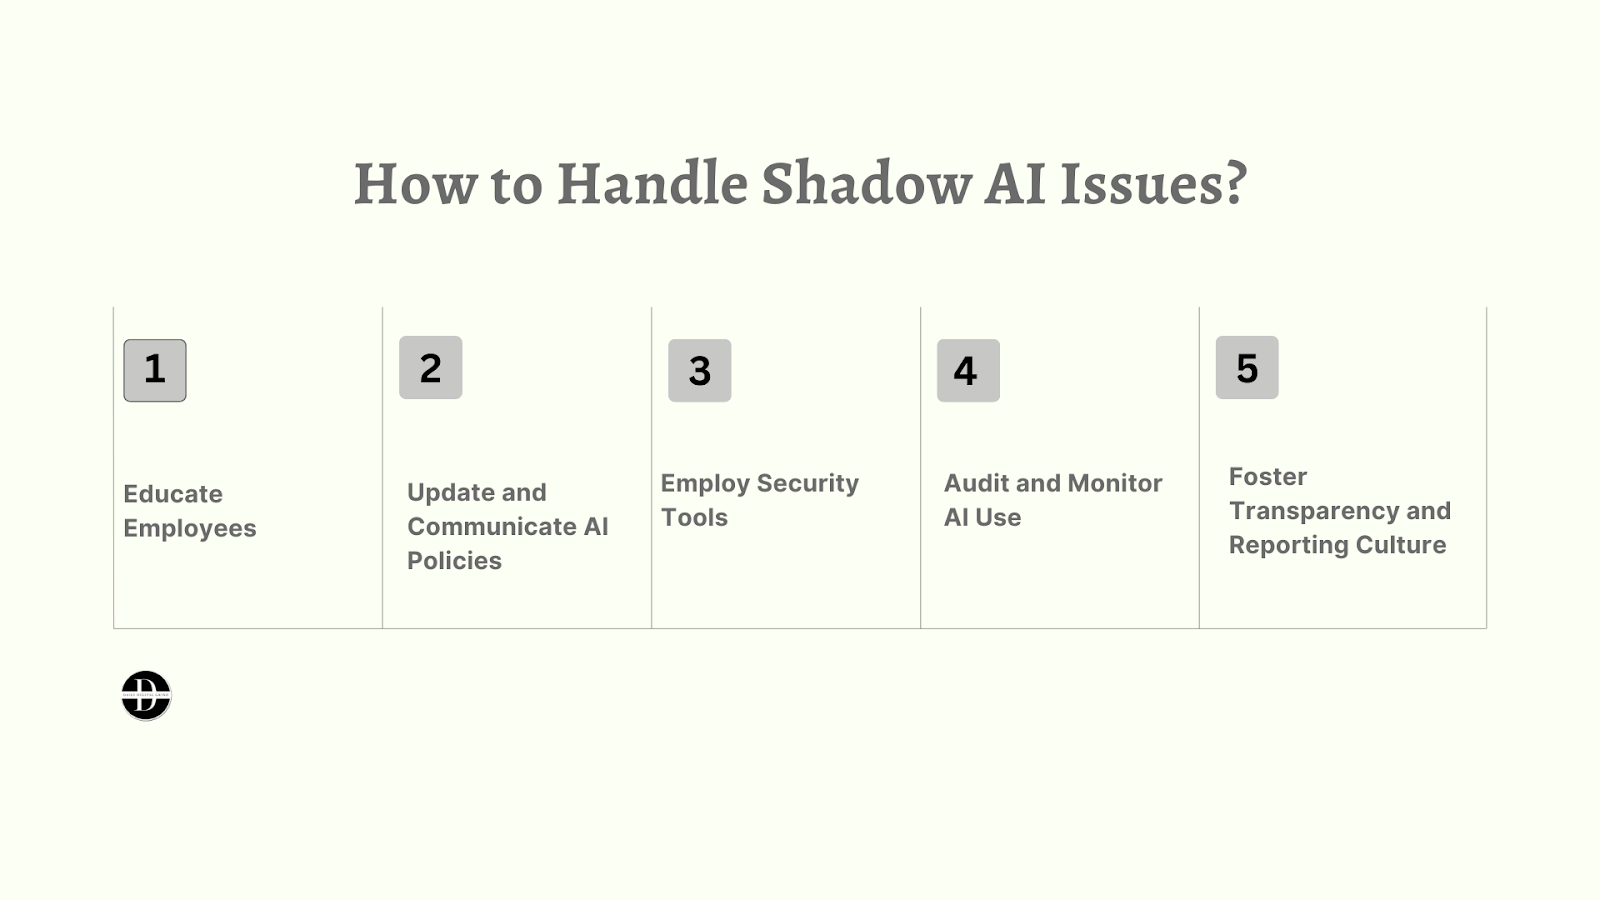 How to handle shadow AI issues